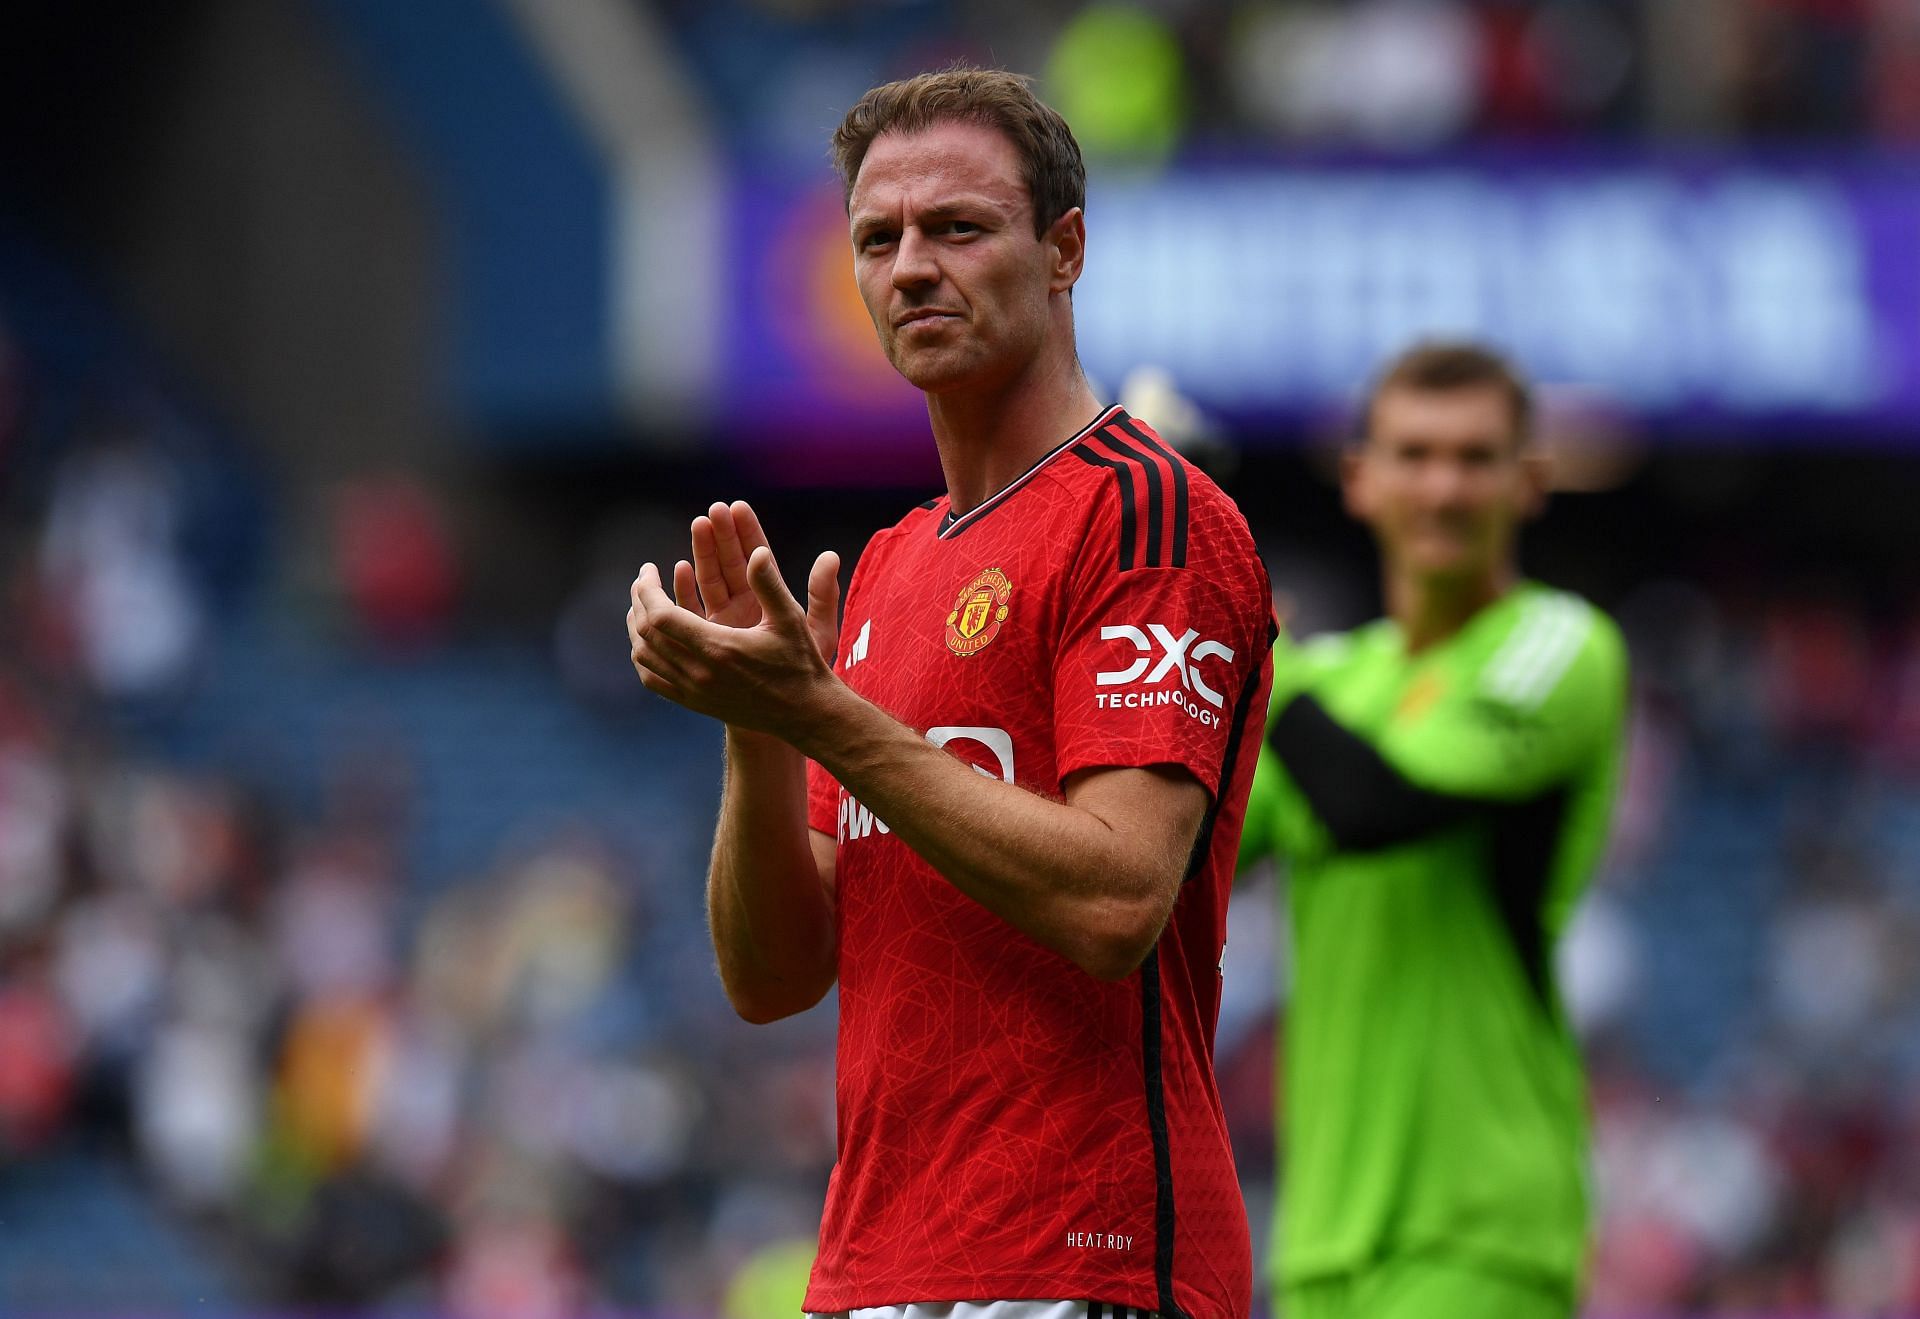 Jonny Evans has signed a one-year deal at Old Trafford.